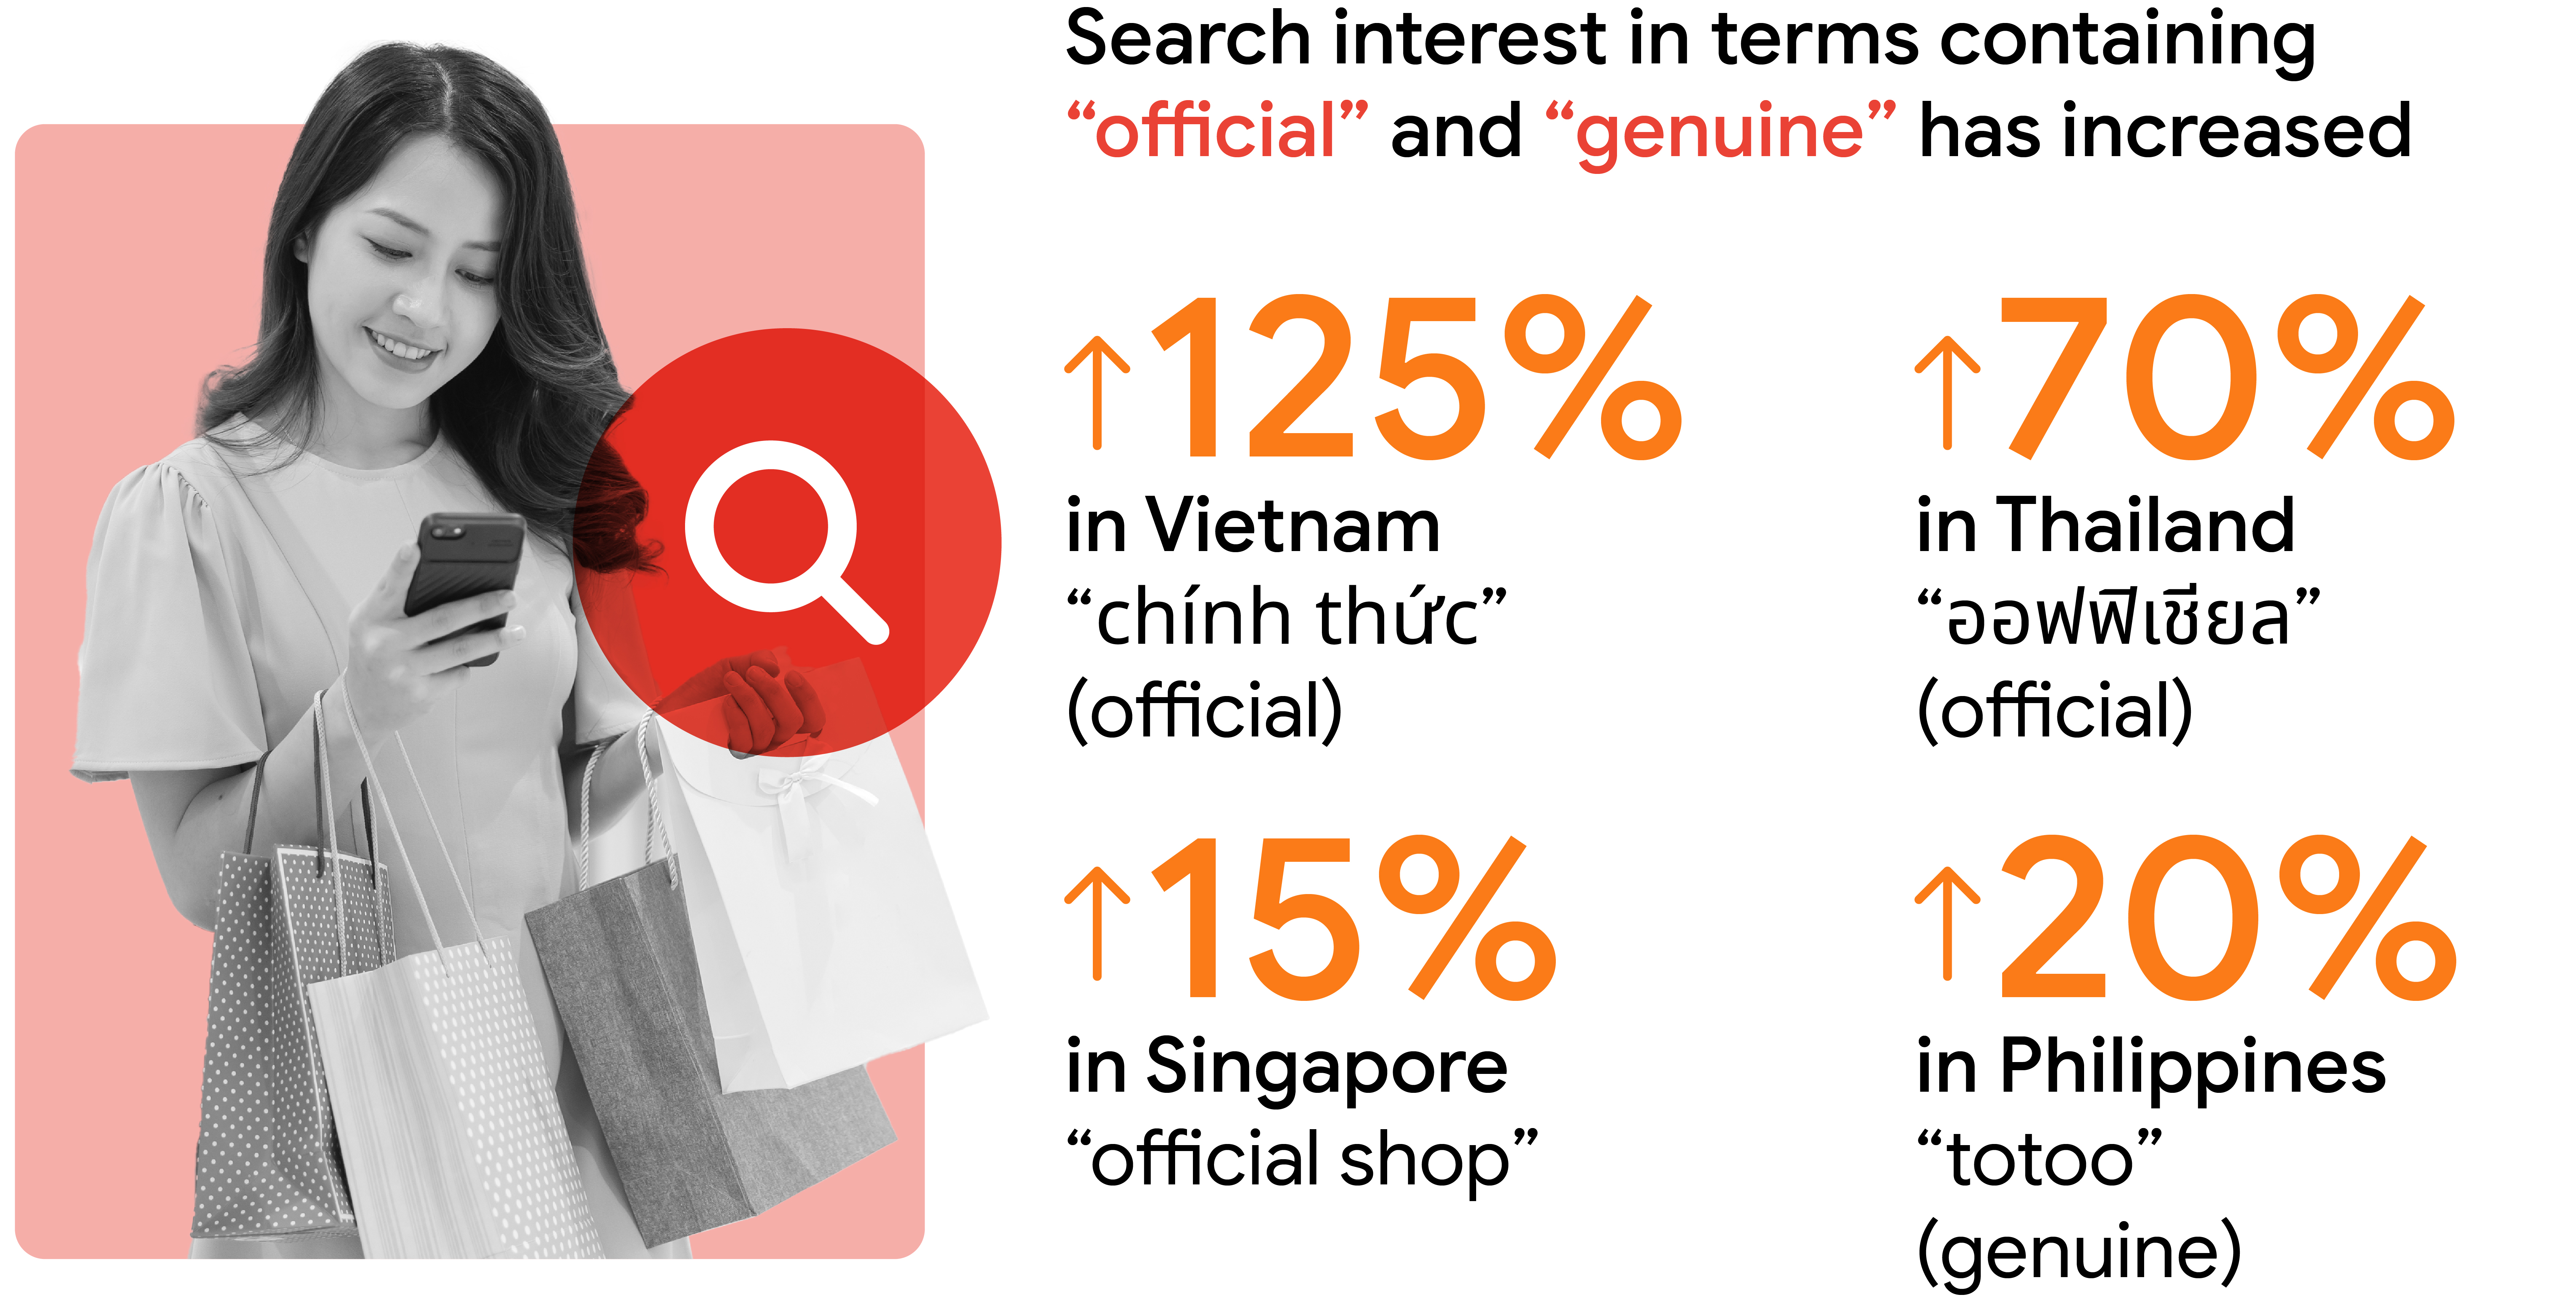 Search interest in terms containing “official” and “genuine” has increased: +125% in Vietnam "chính thức" (official), +70% in Thailand "ออฟฟิเชียล" (official), +20% in the Philippines "totoo" (genuine), and +15% in Singapore "official shop".